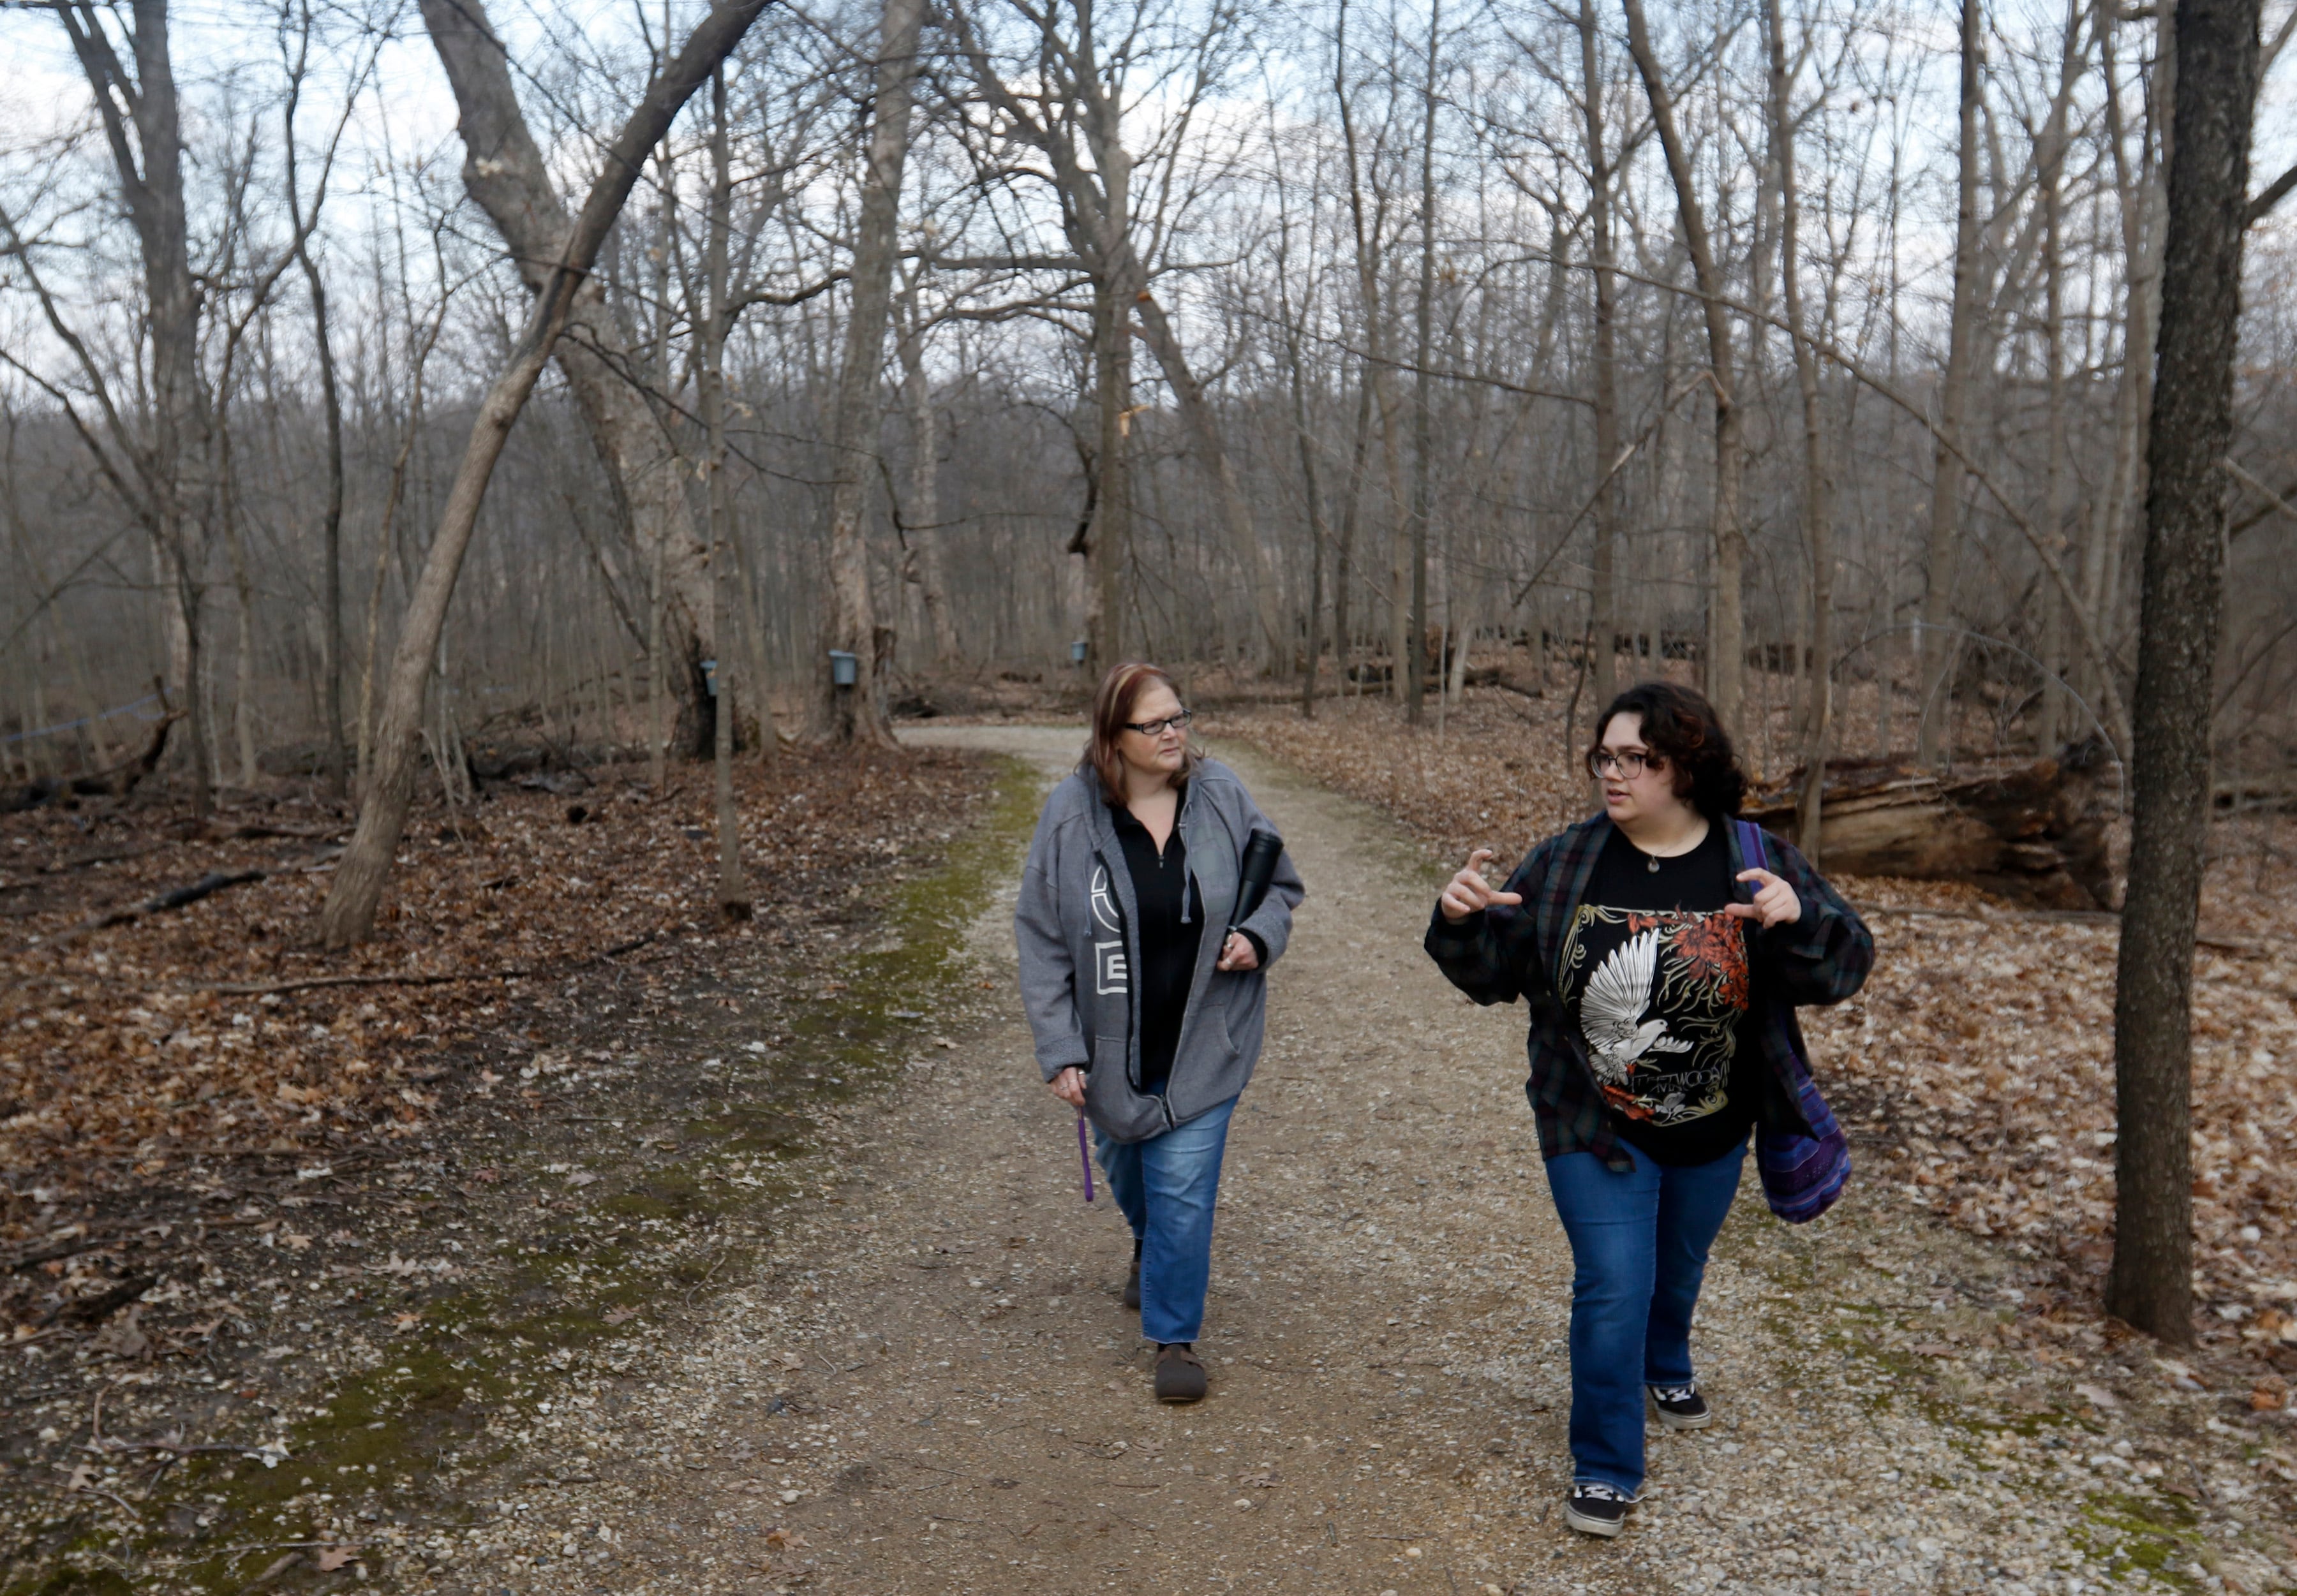 Fawn Vincent, of Wonder Lake, talks with her daughter, Reese, of Nashville, as they walk through the forest during the McHenry County Conservation District’s annual Festival of the Sugar Maples on Monday, March 6, 2023, at Coral Woods Conservation Area in Marengo.